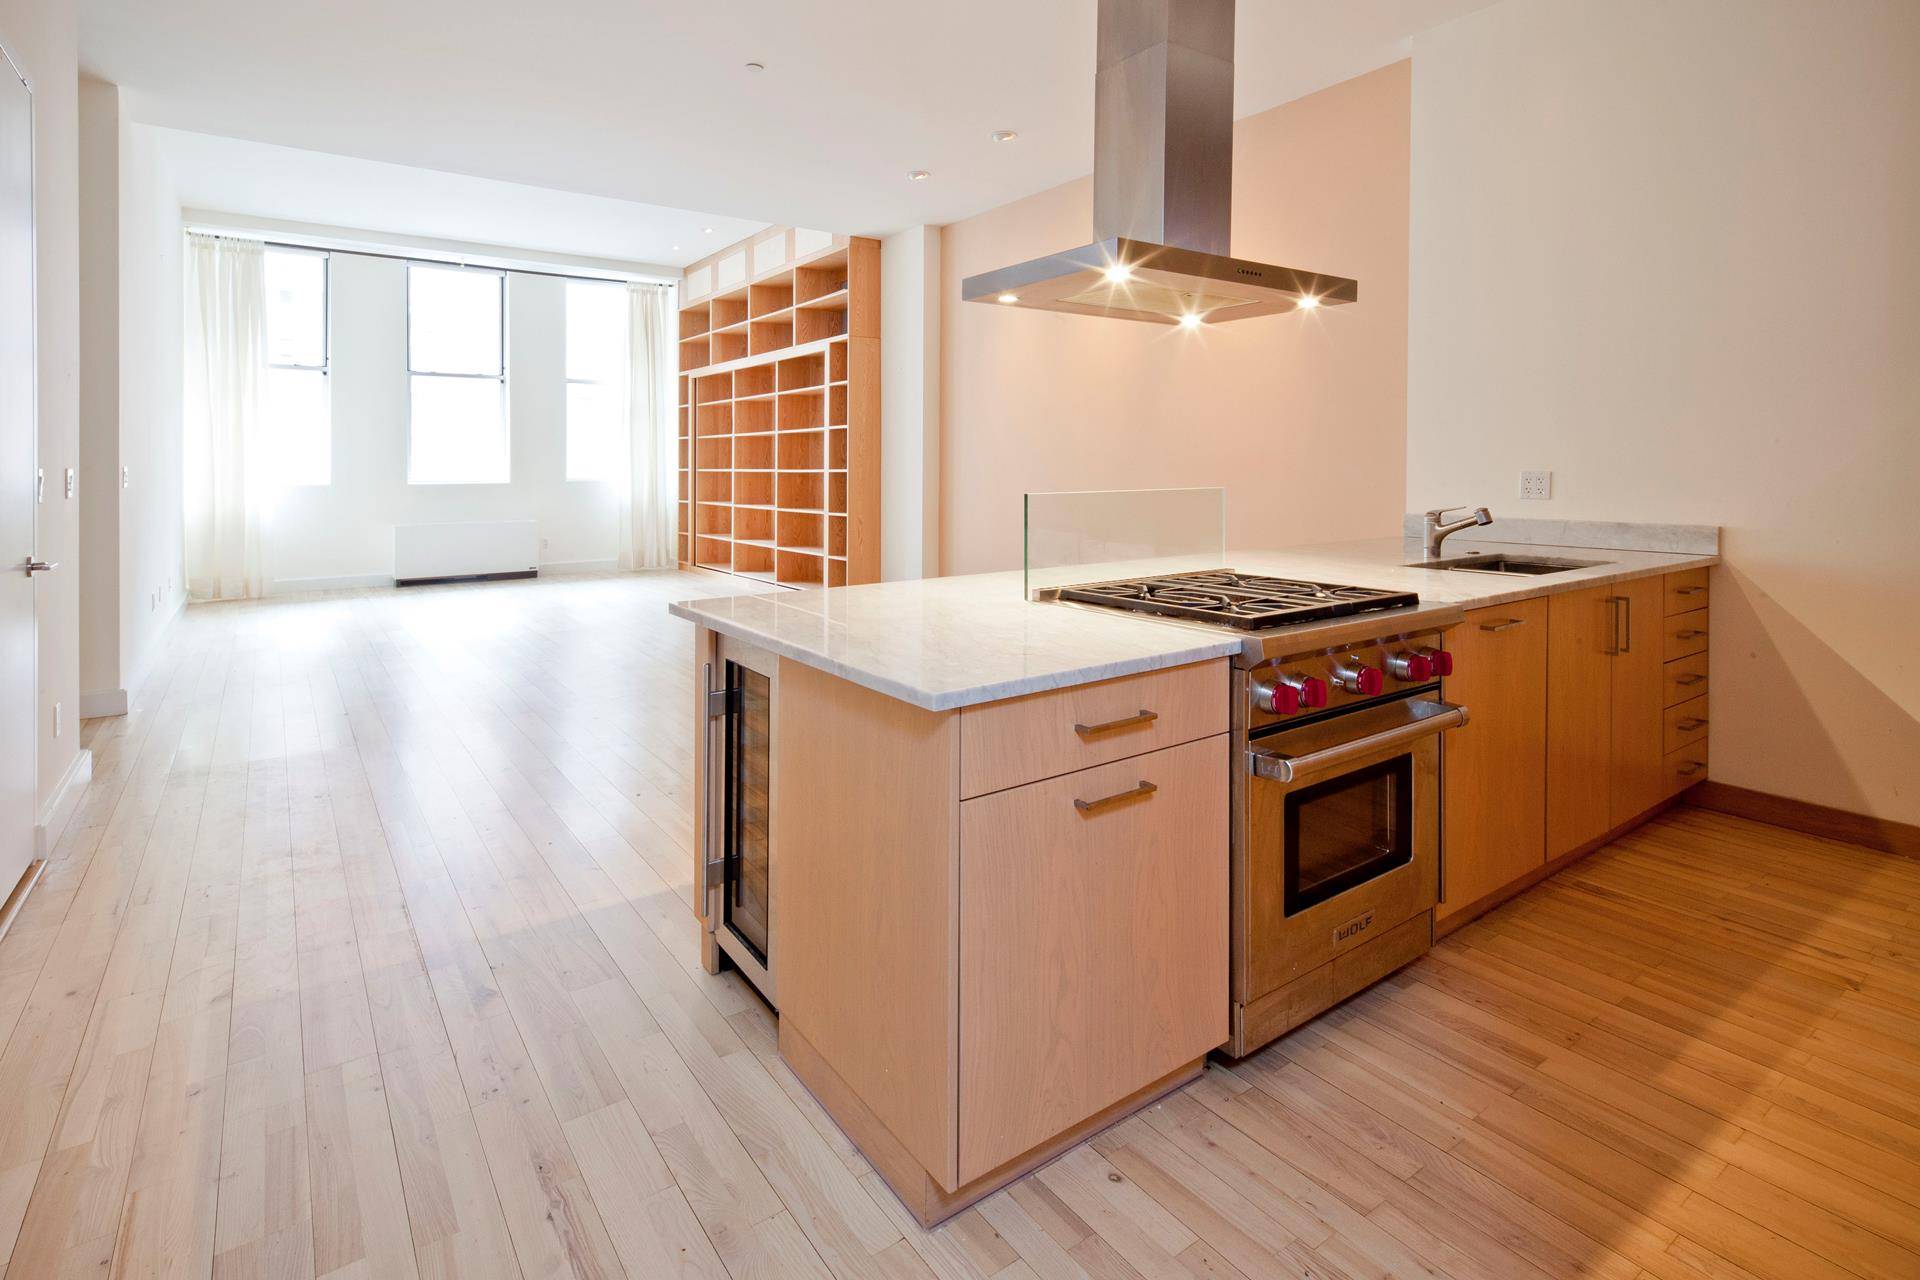 Located in one of Chelsea's most distinctive luxury buildings, this rarely available, sun drenched two bedroom two bathroom loft with a home office offers an abundant 1, 578 square feet ...